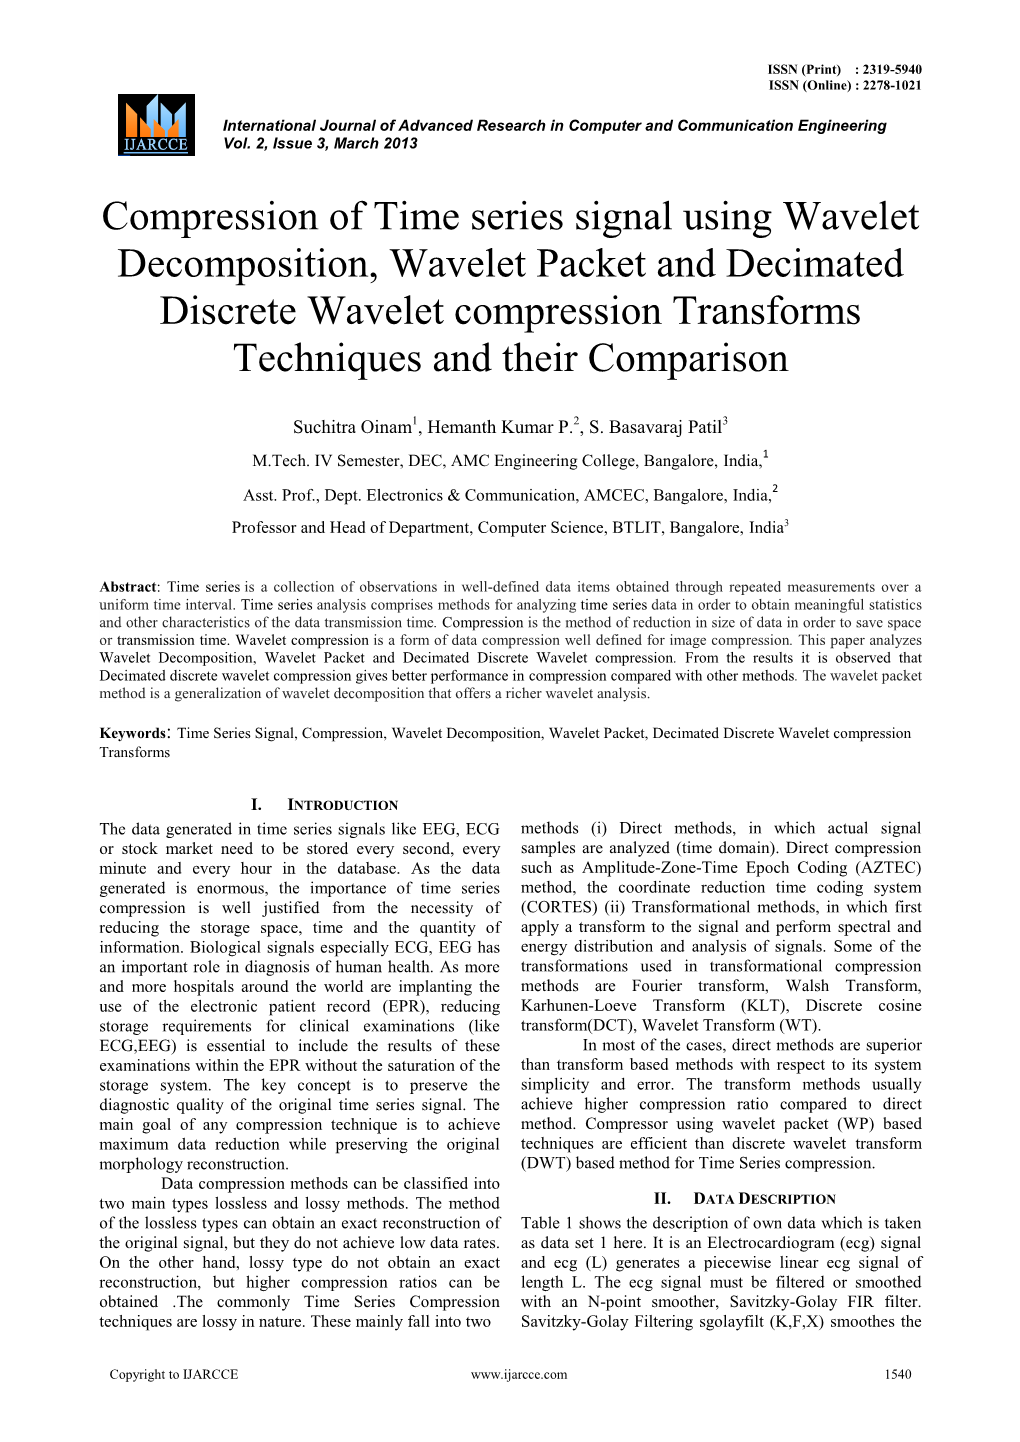 Compression of Time Series Signal Using Wavelet Decomposition, Wavelet Packet and Decimated Discrete Wavelet Compression Transforms Techniques and Their Comparison